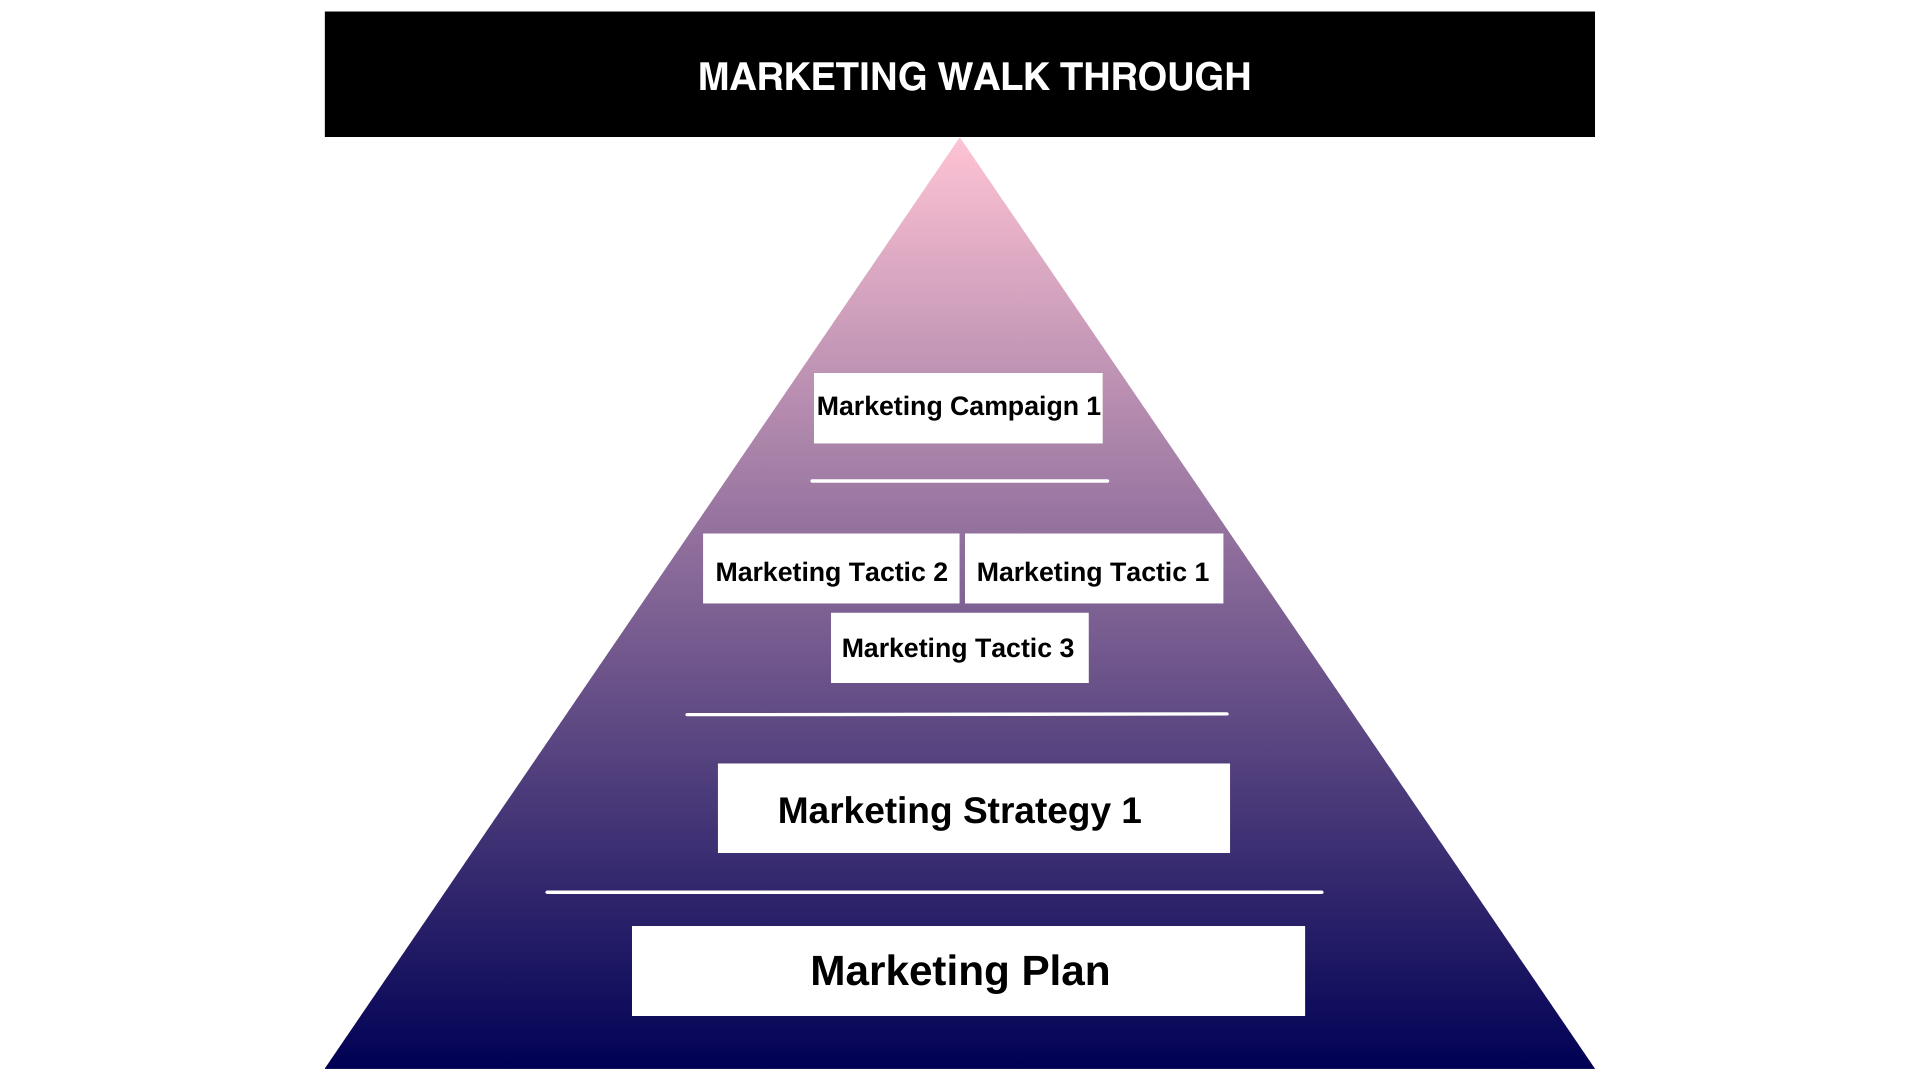 Understanding Marketing: The Difference Between Marketing Plans, Strategies, Tactics, and Campaigns